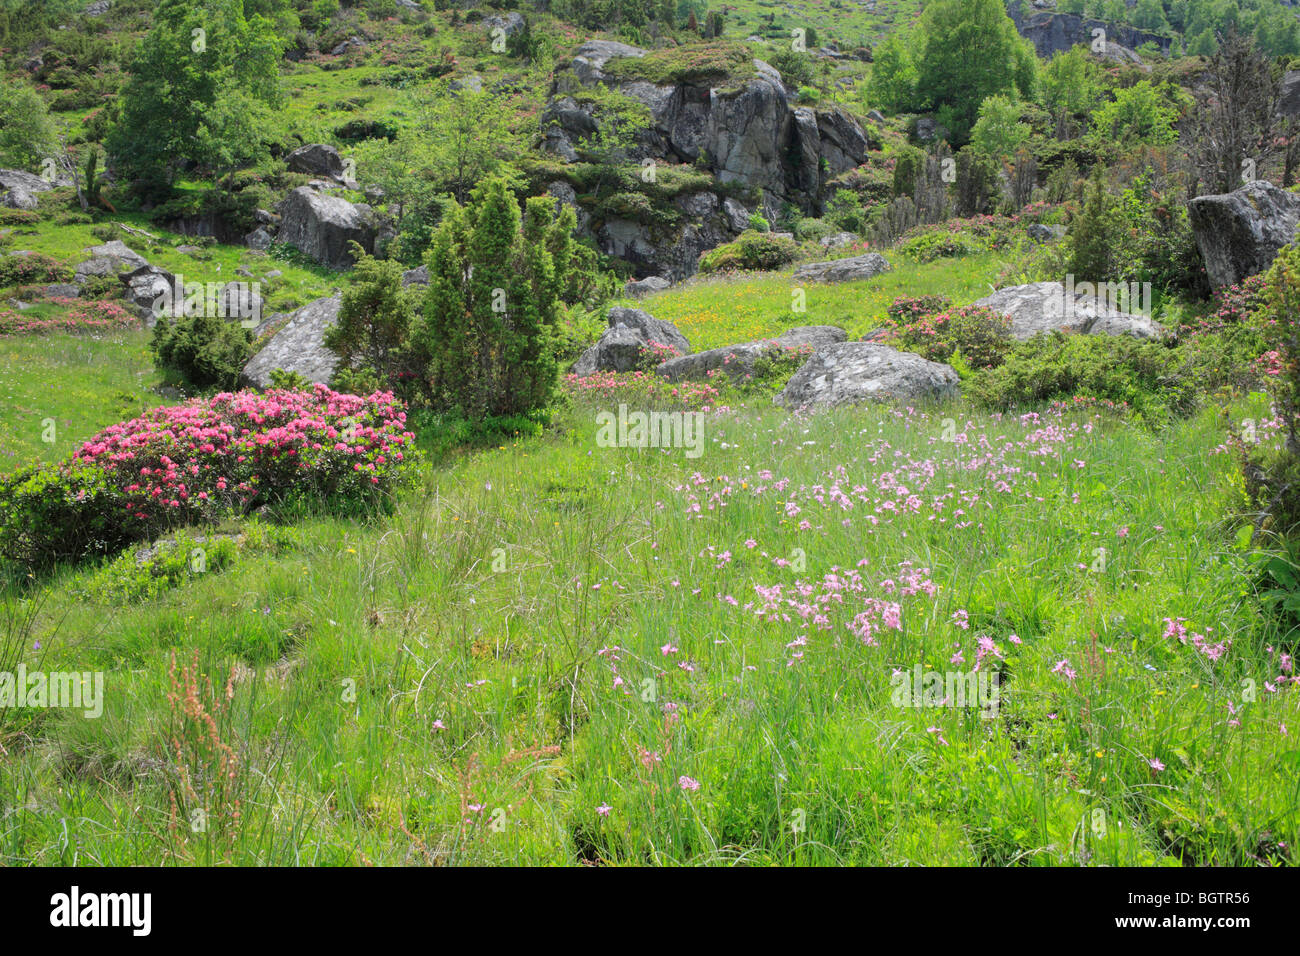 Ragged Robin (Lychnis flos-cuculi) flowering in marshy habitat at 1600m altitude. Ariege Pyrenees, France. Stock Photo